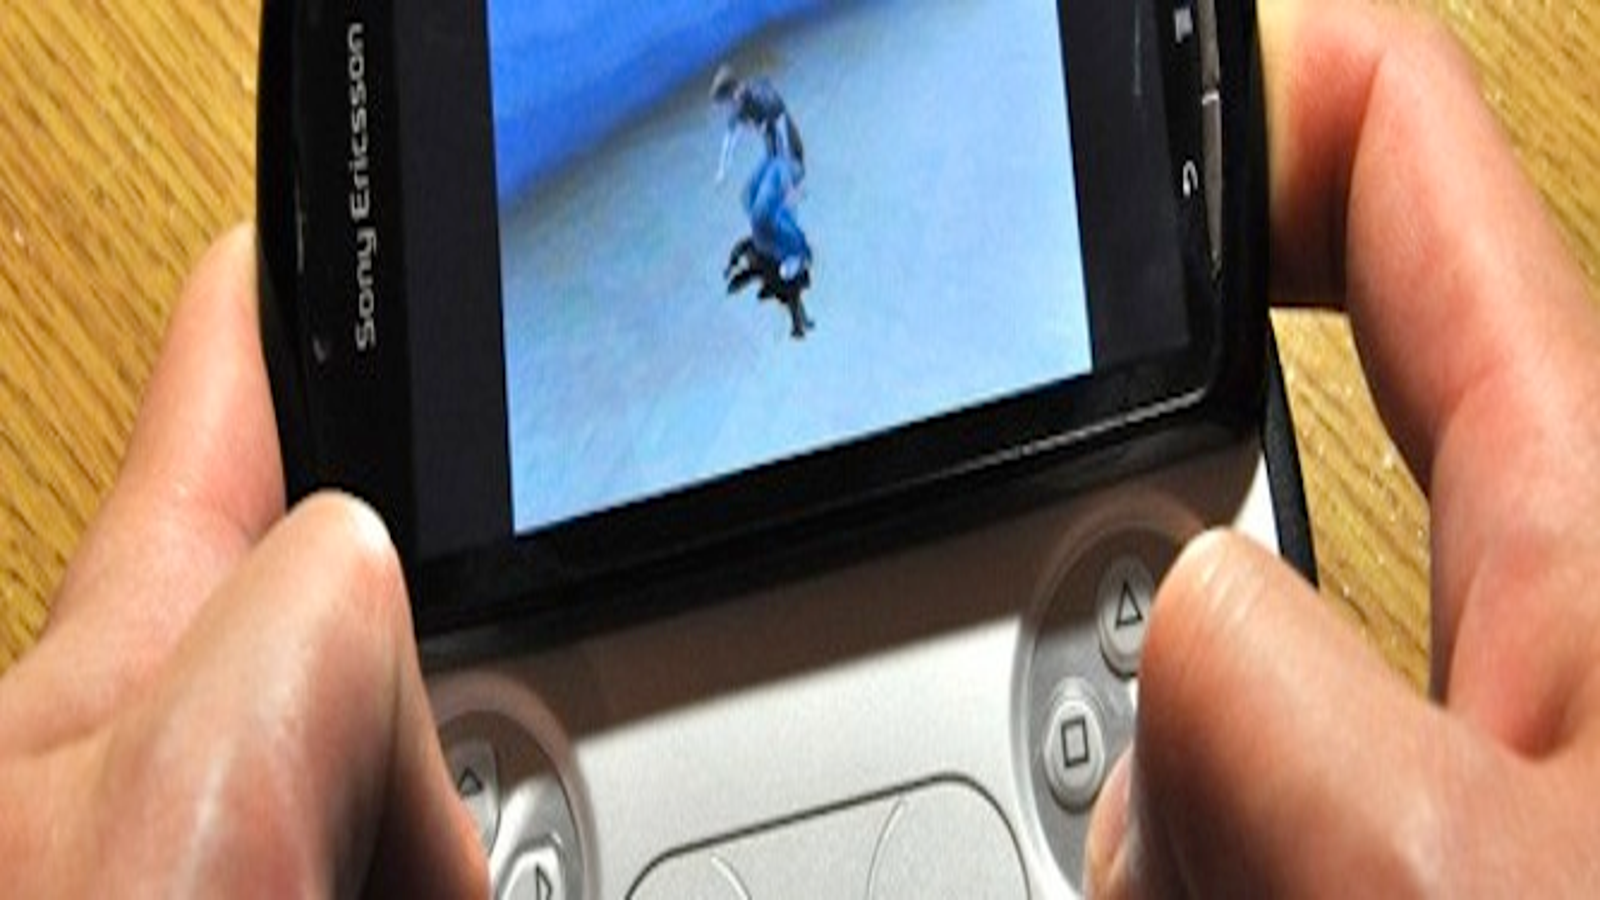 xperia play wallpapers hd